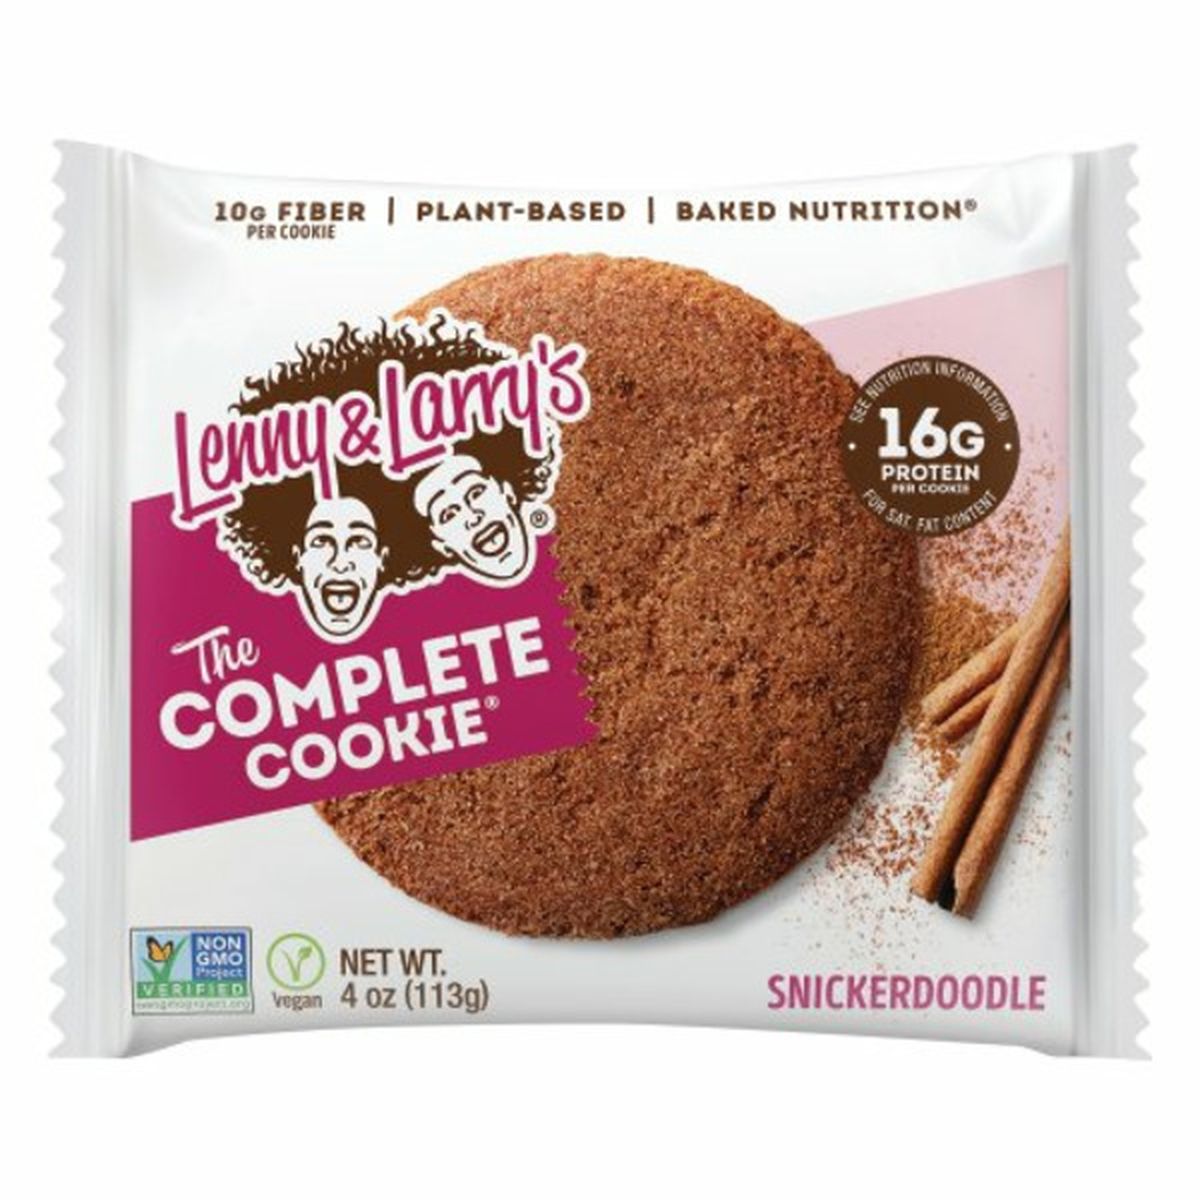 Calories in Lenny & Larry's The Complete Cookie, Snickerdoodle